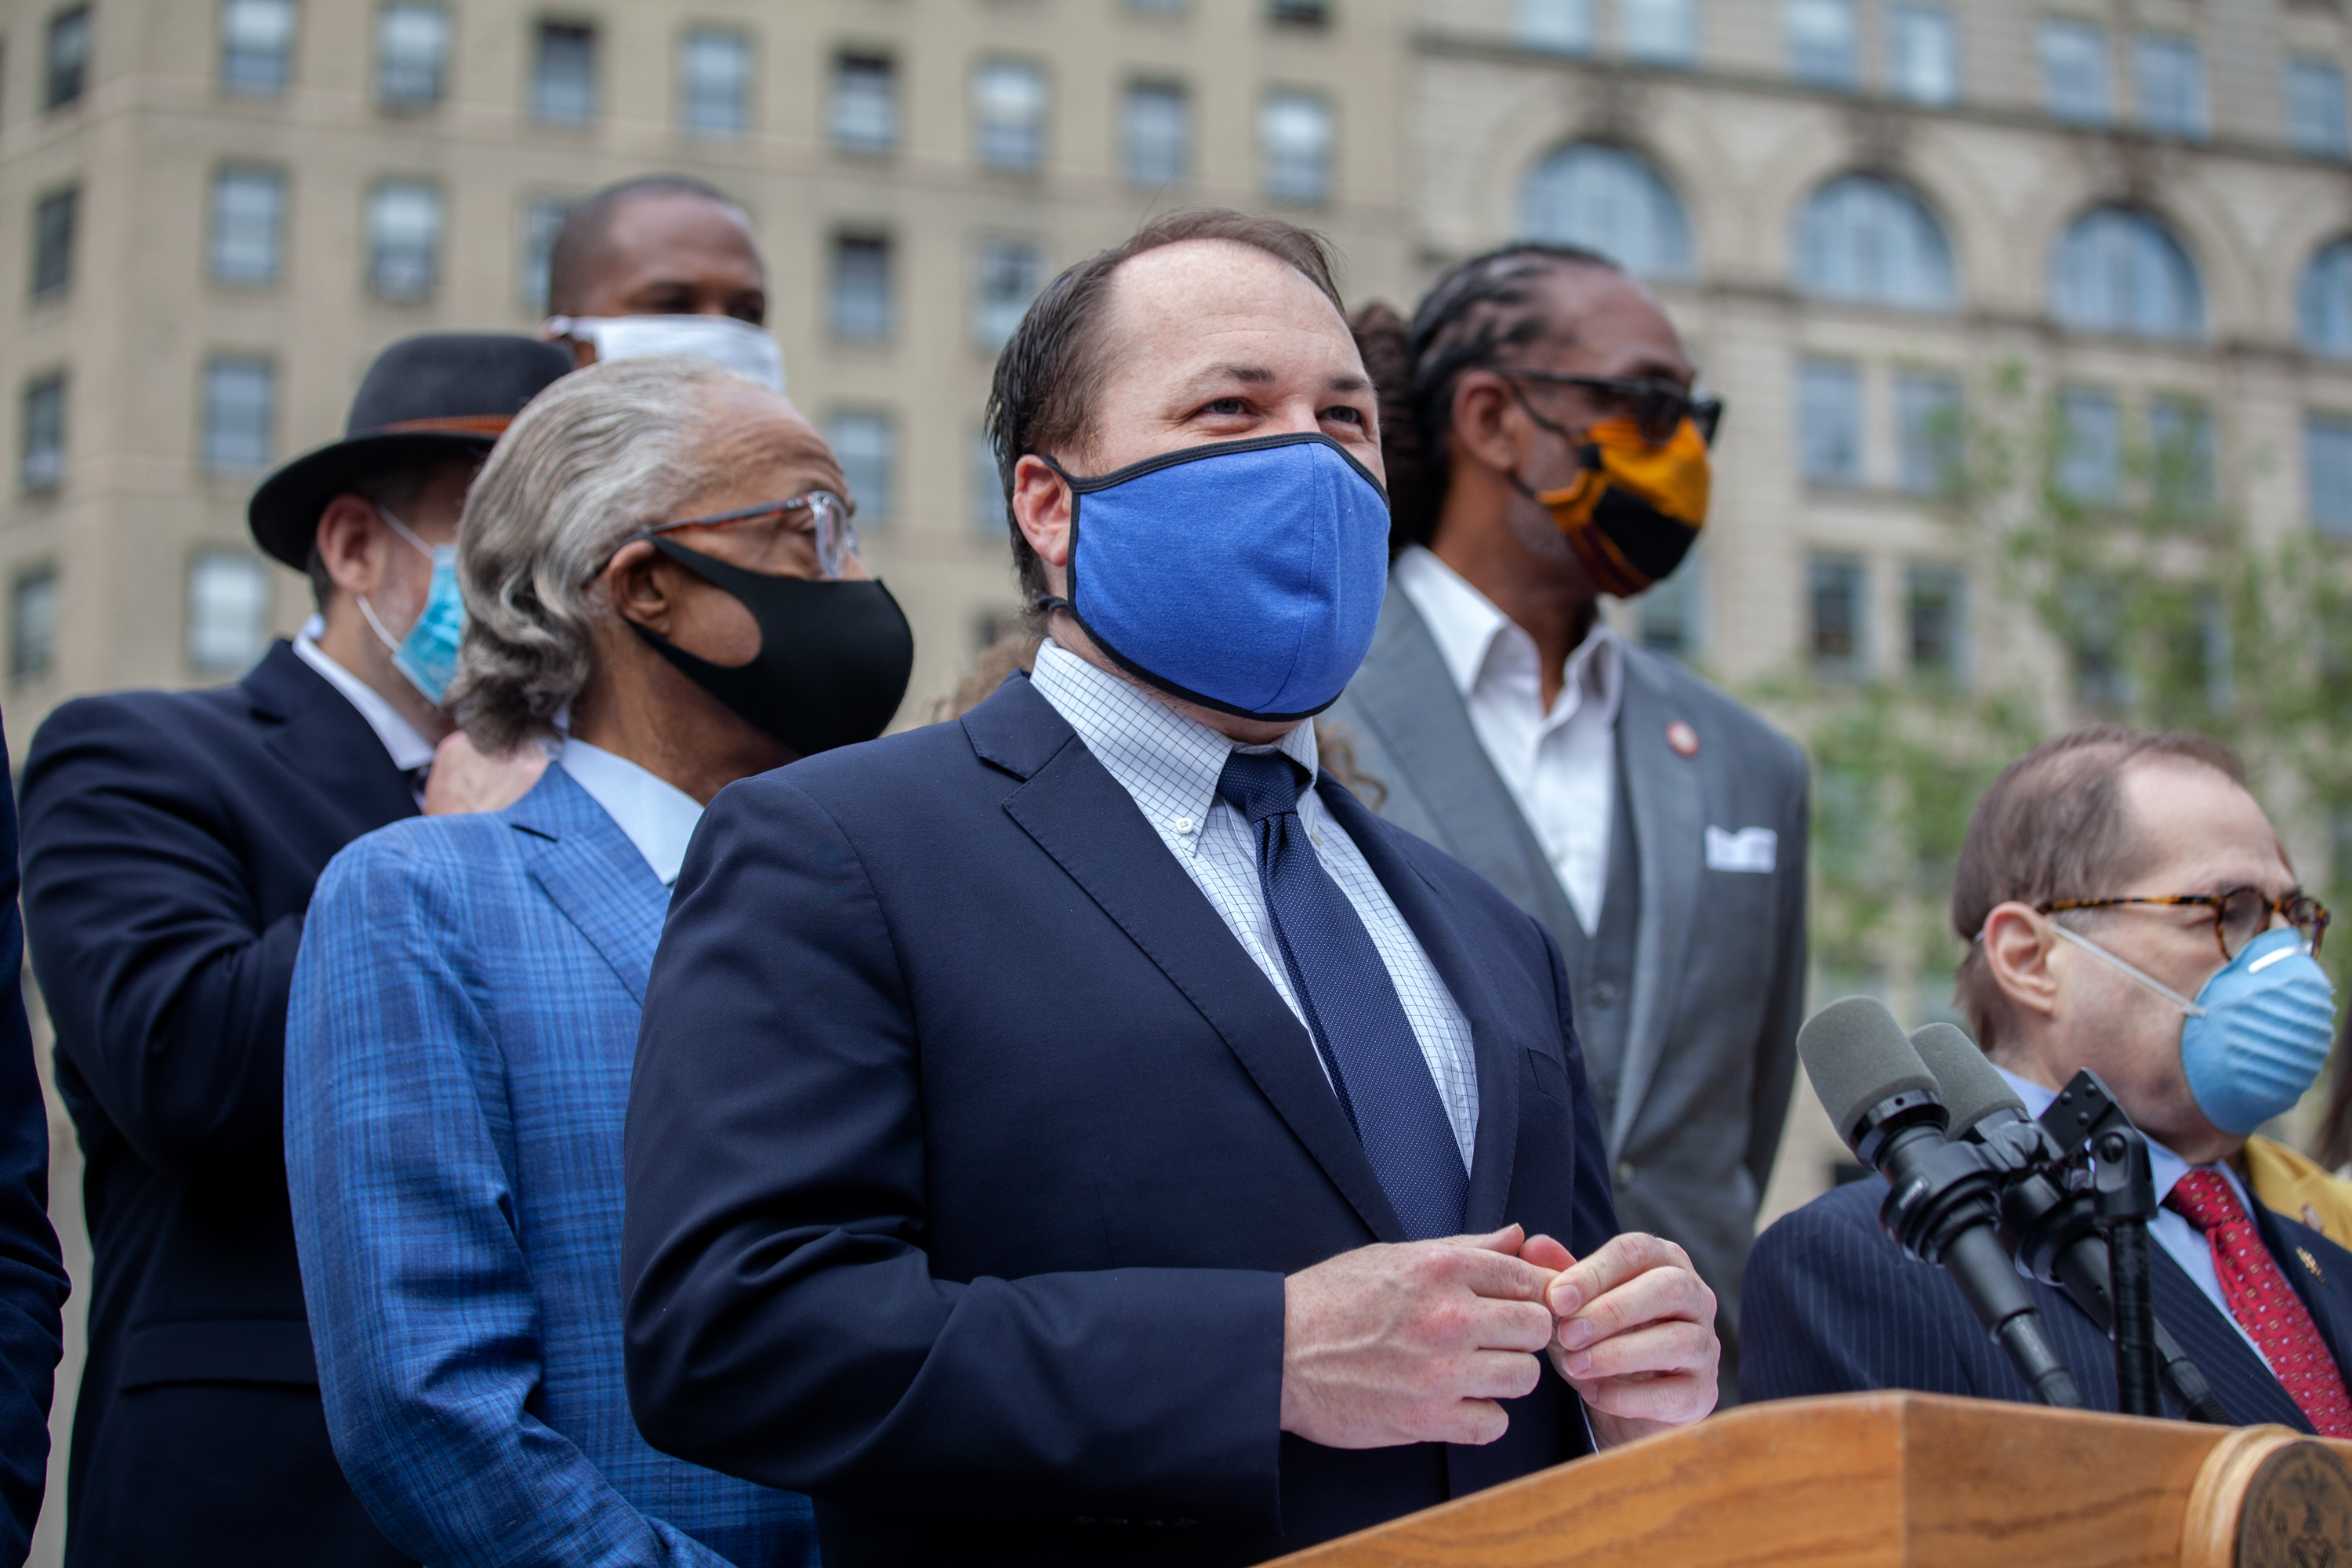 City Council Speaker Corey Johnson (D-Manhattan) speaks at a press conference in Foley Square about passing legislation for more police accountability, June 2, 2020.